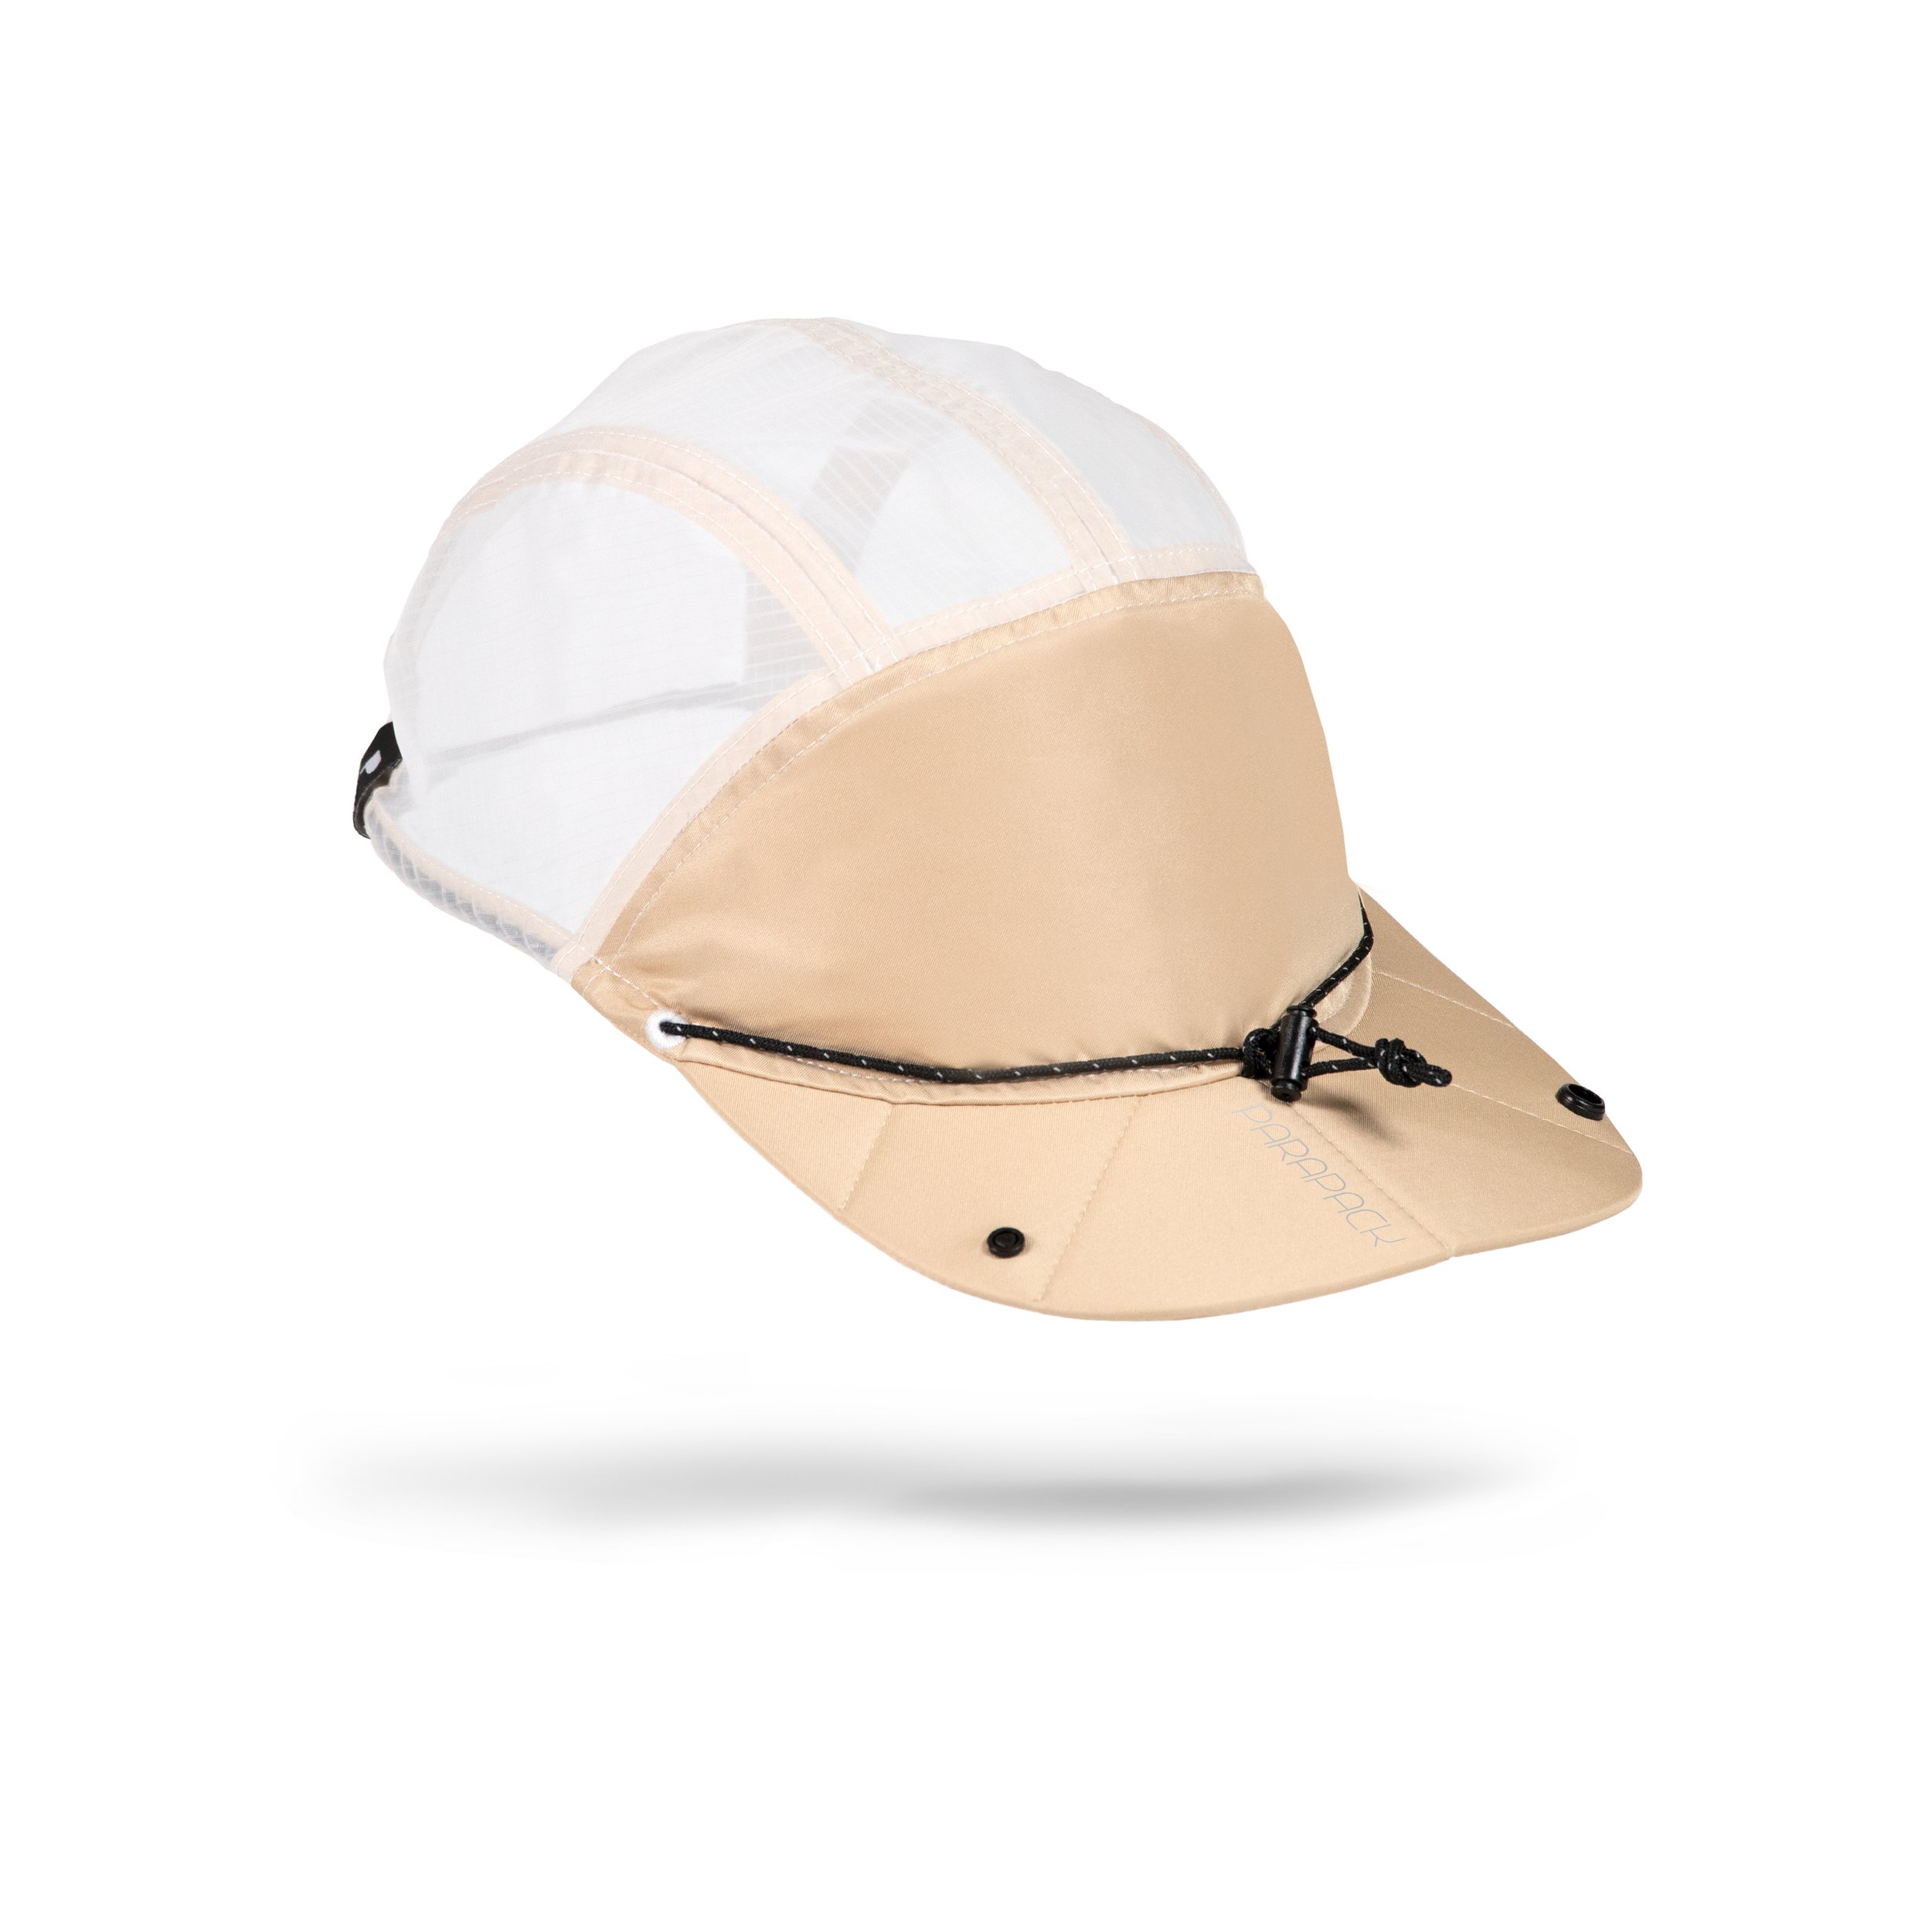 Parapack P-Cap Lite | Safari | Ultra-lightweight packable headwear for all  head sizes! — PARAPACK